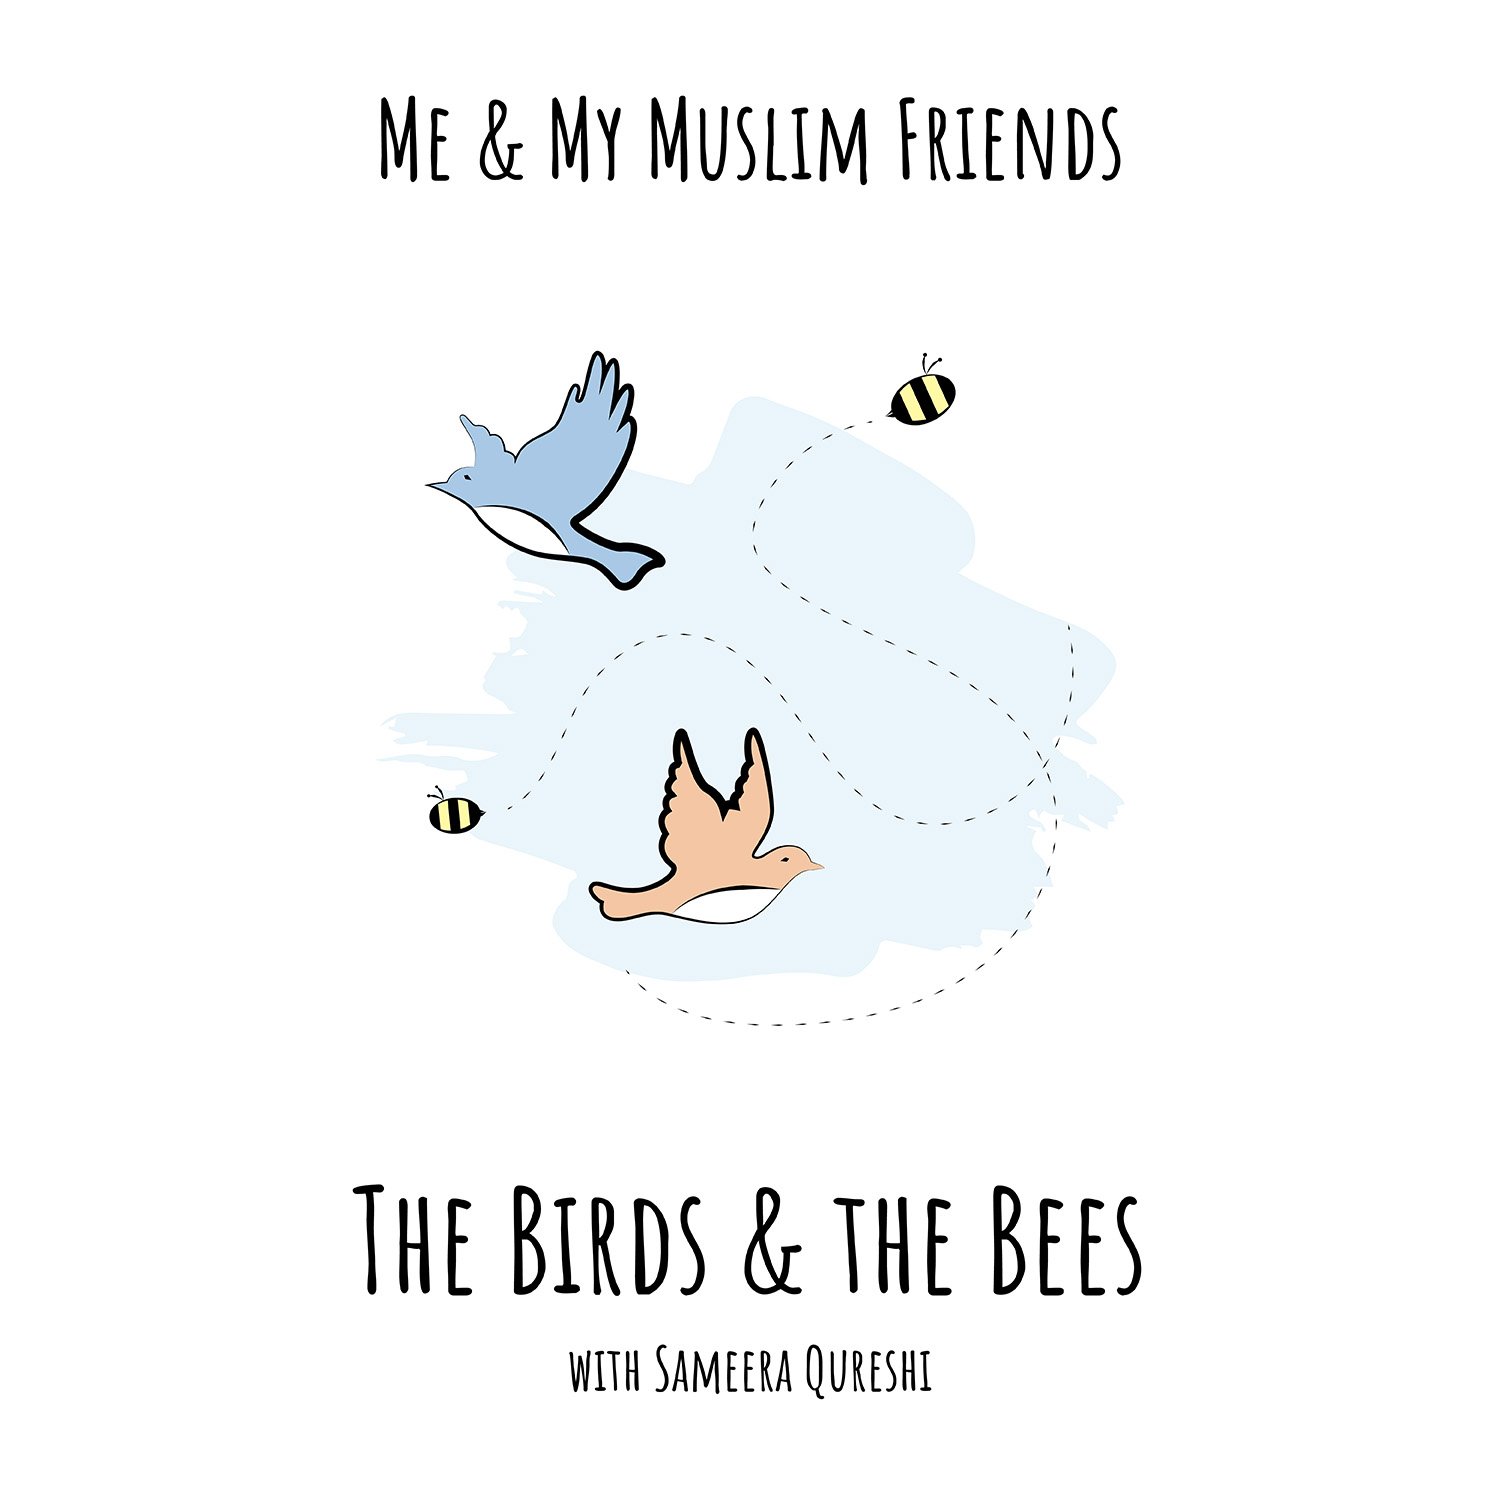 The Birds & The Bees with Sameera Qureshi